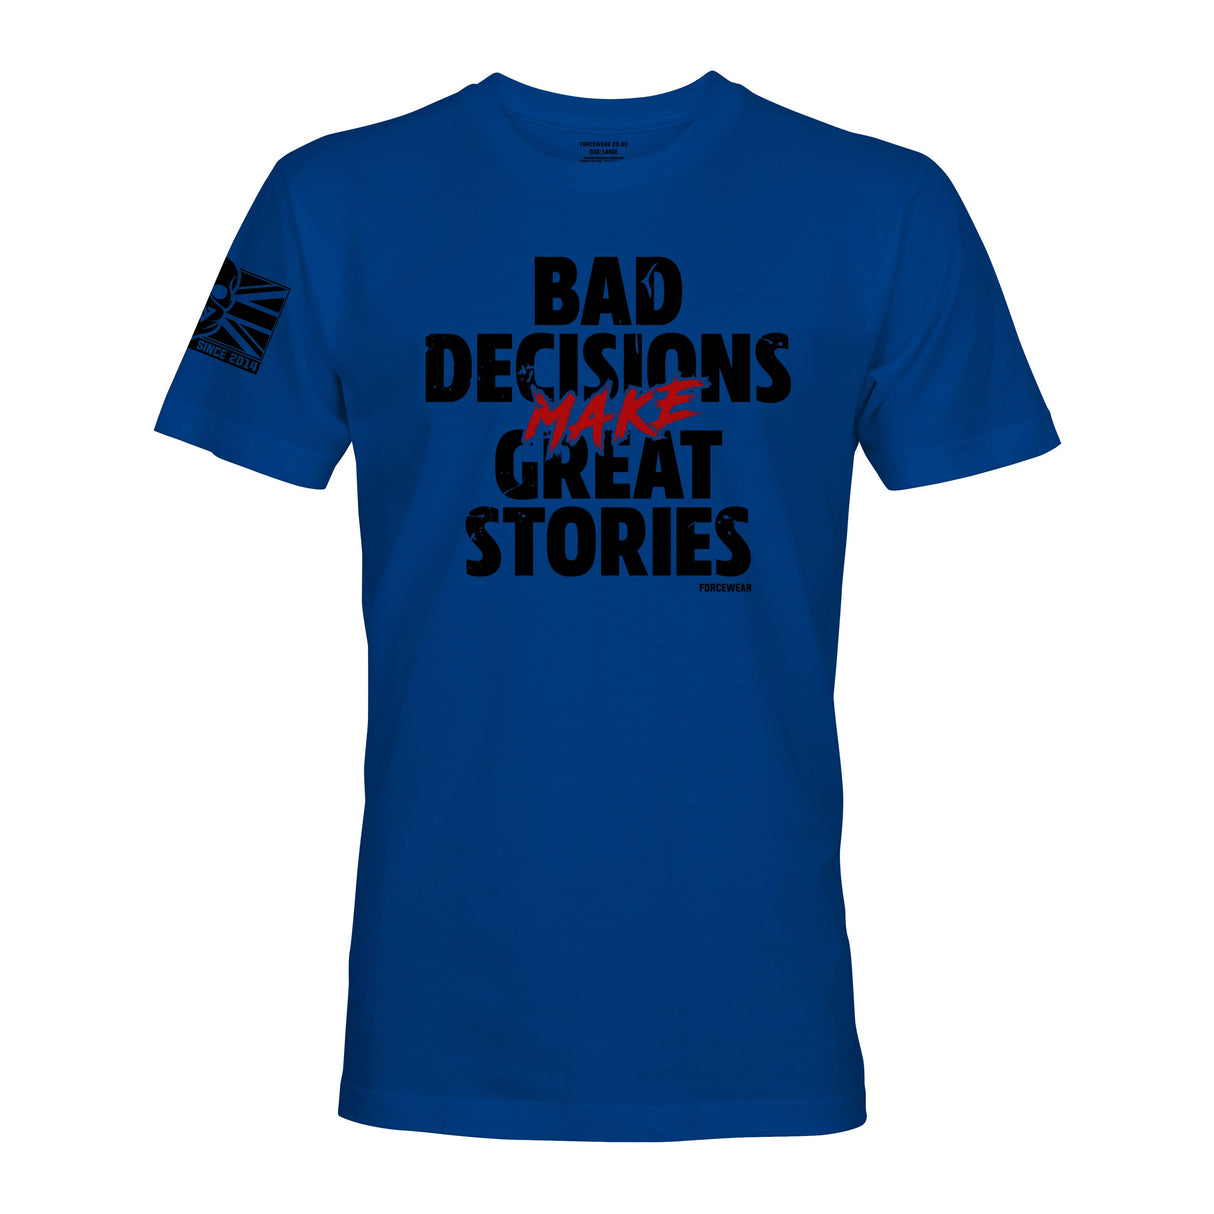 BAD DECISIONS MAKE GREAT STORIES - Force Wear HQ - T-SHIRTS